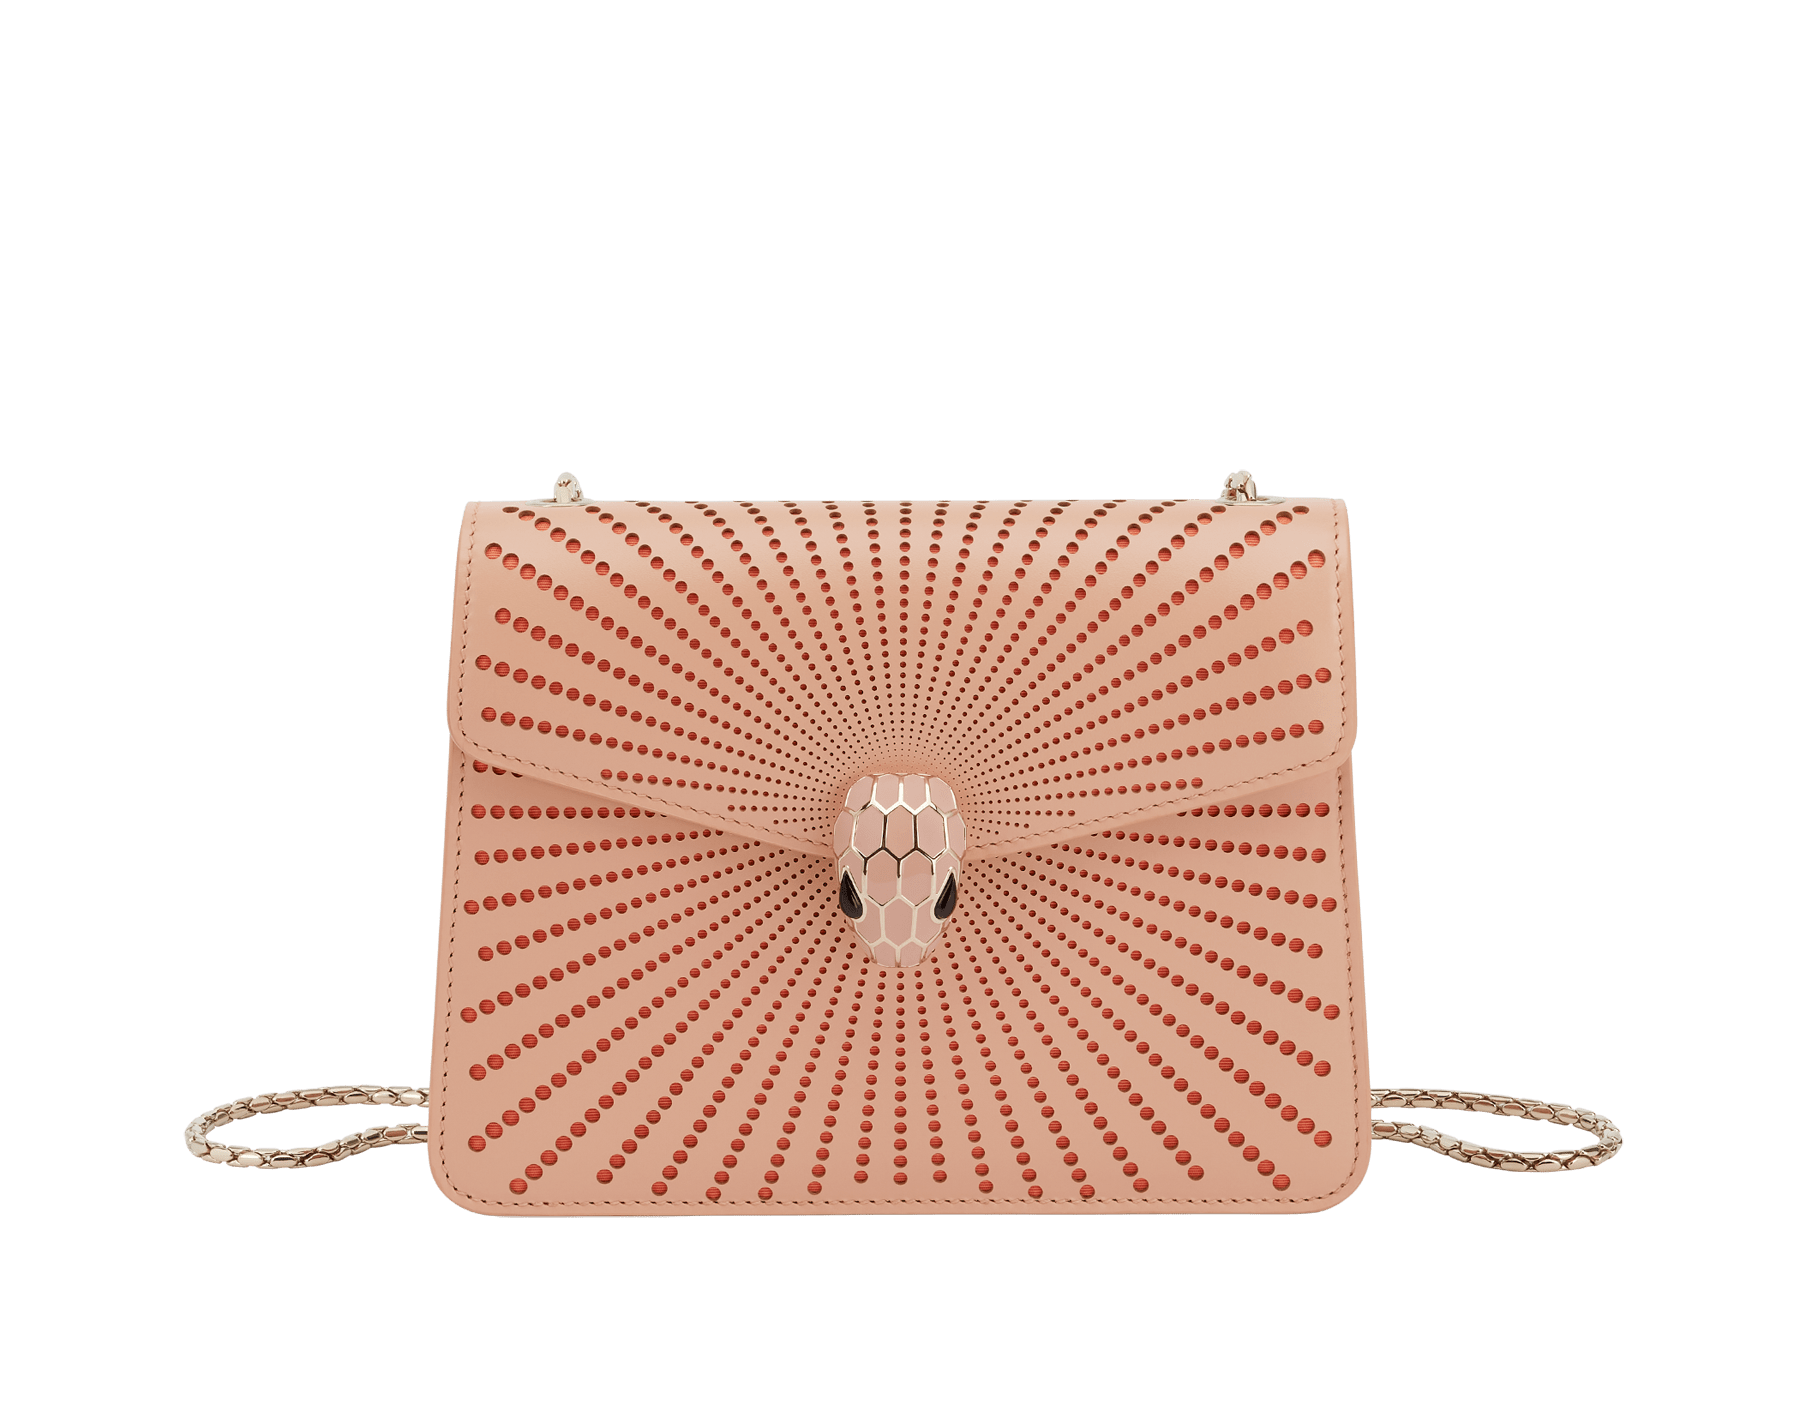 Serpenti Forever crossbody bag in ivory opal laser-cut calf leather with caramel topaz beige nappa leather lining. Captivating snakehead closure in light gold-plated brass embellished with matt and shiny ivory opal enamel scales and black onyx eyes. 422-LCL image 1